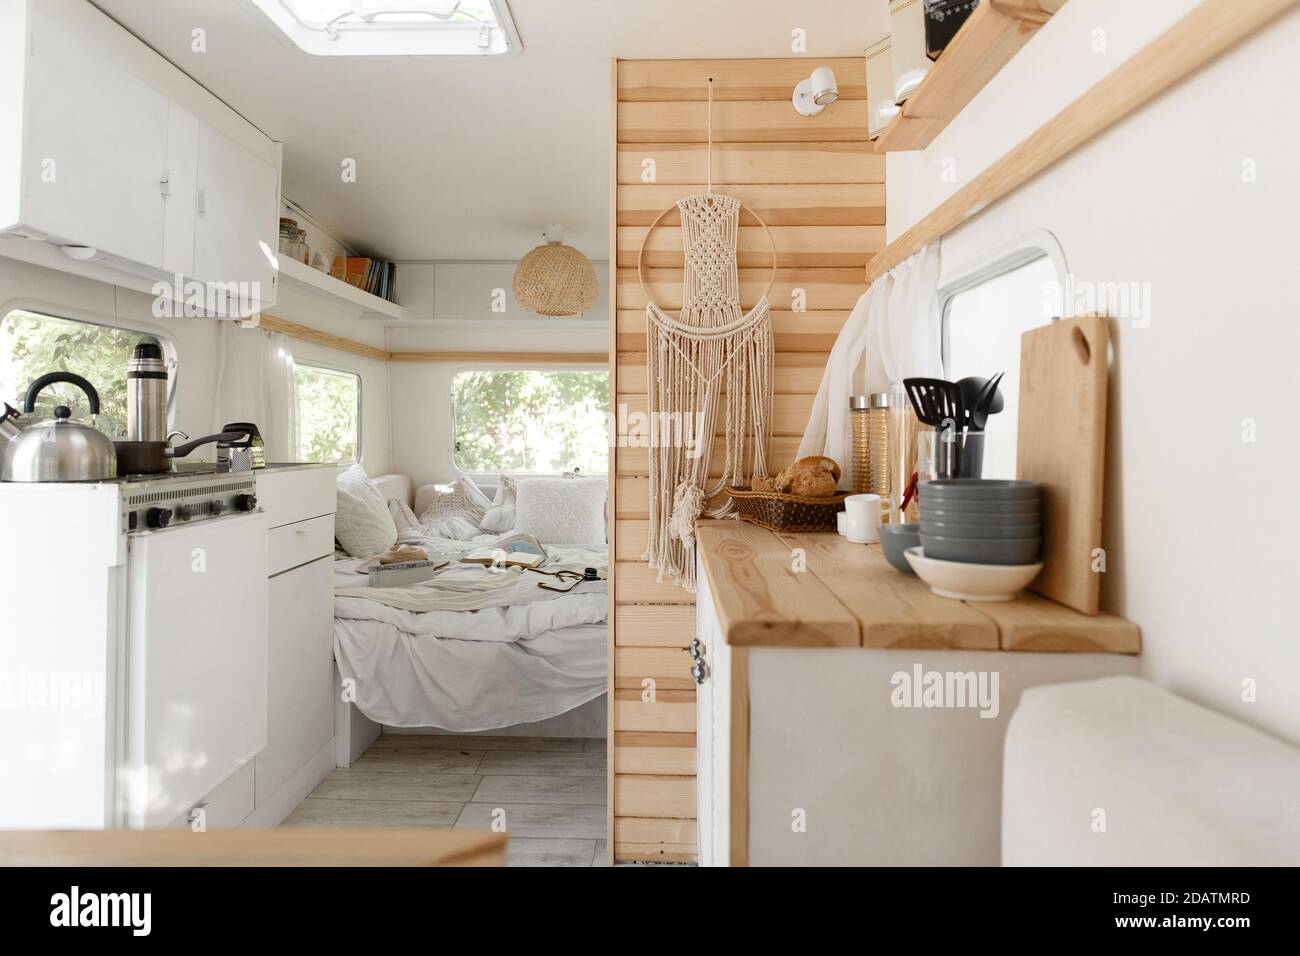 Camping in trailer, rv kitchen and bedroom, nobody Stock Photo